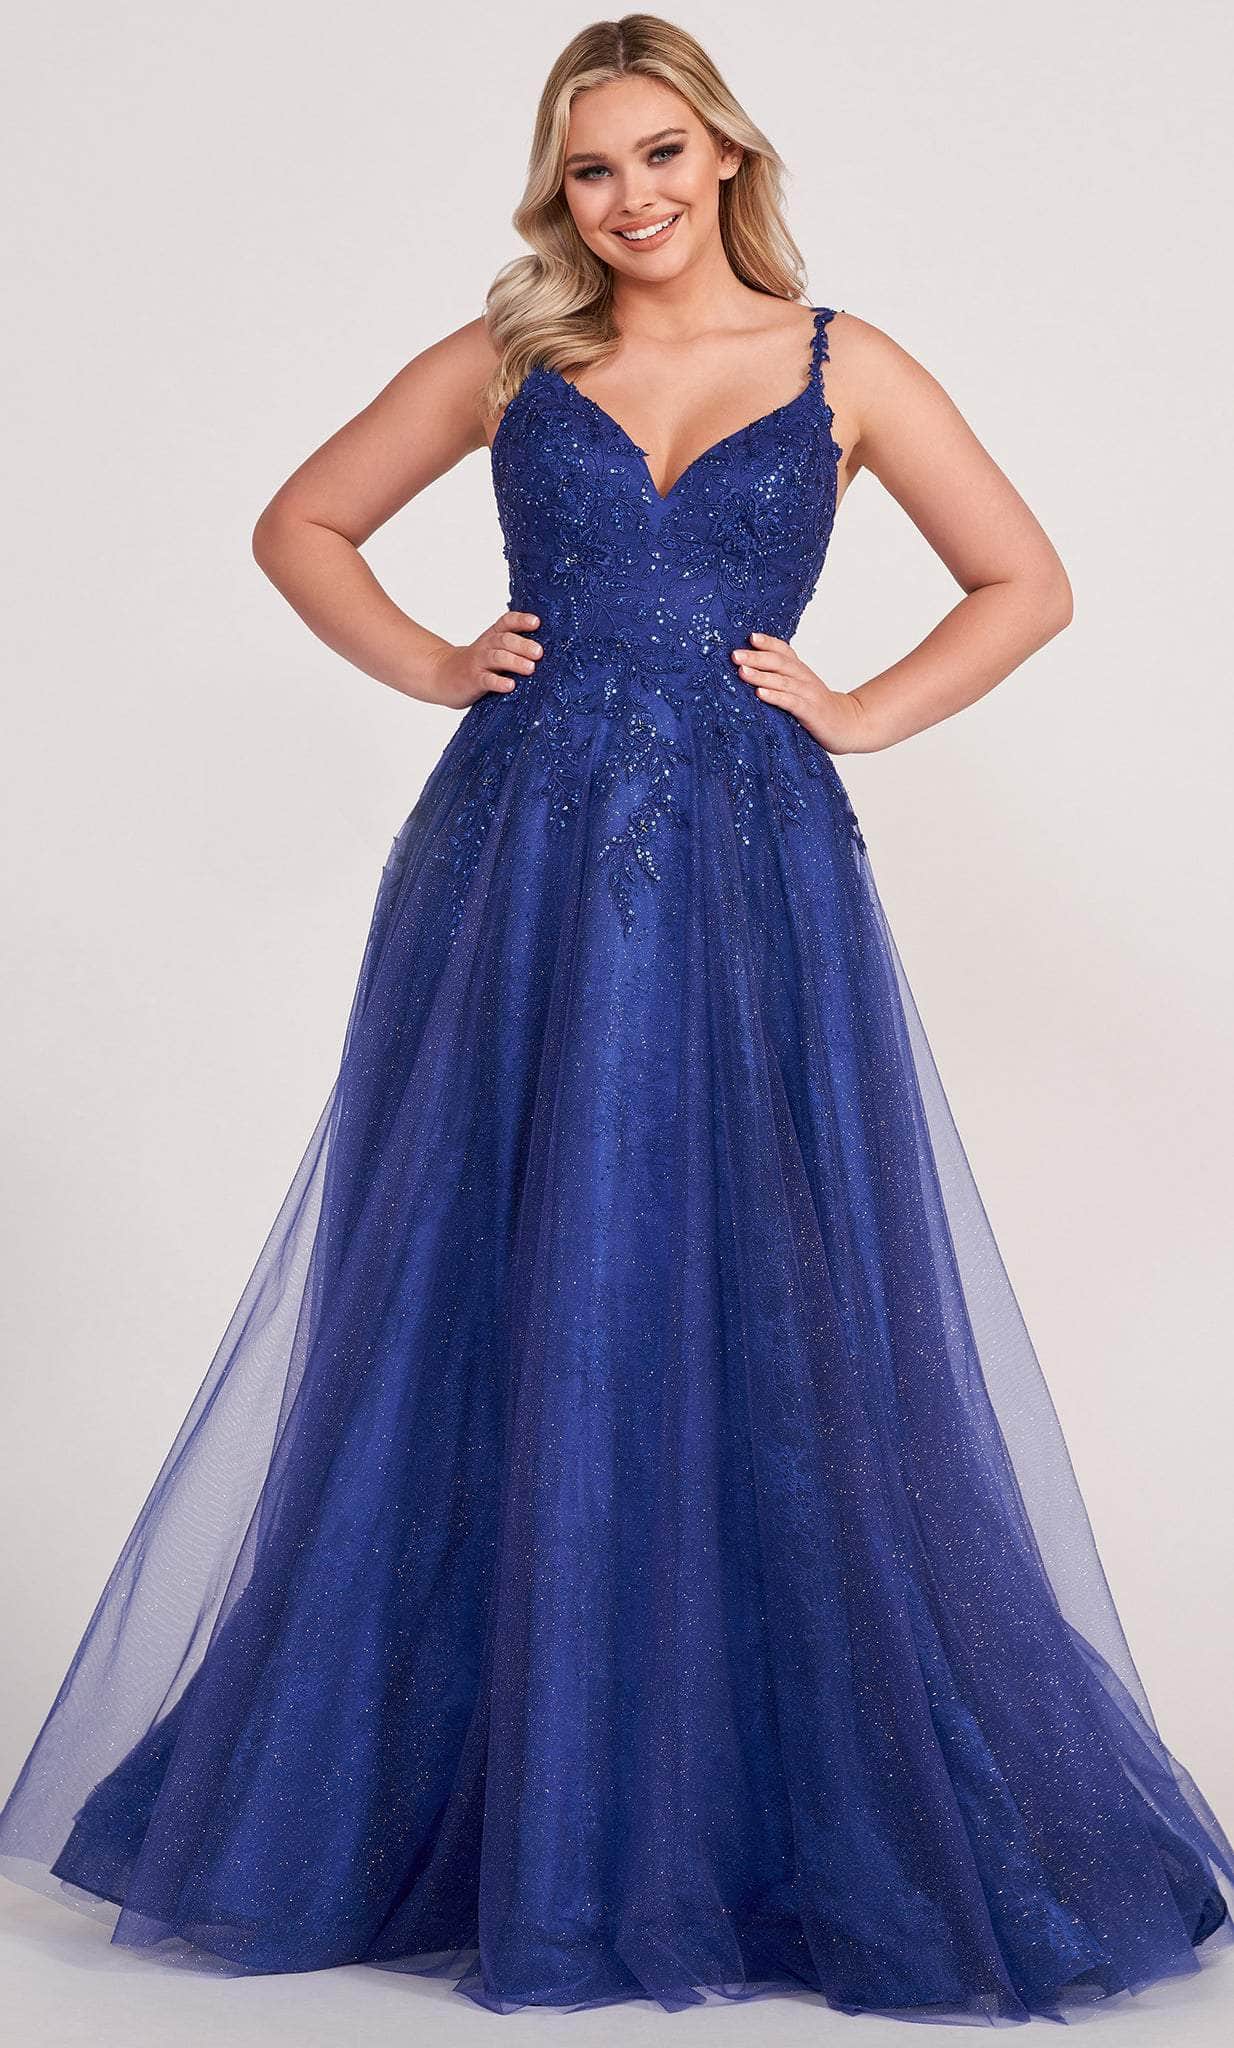 Image of Ellie Wilde EW34086 - Deep V-Neck Lace Prom Gown